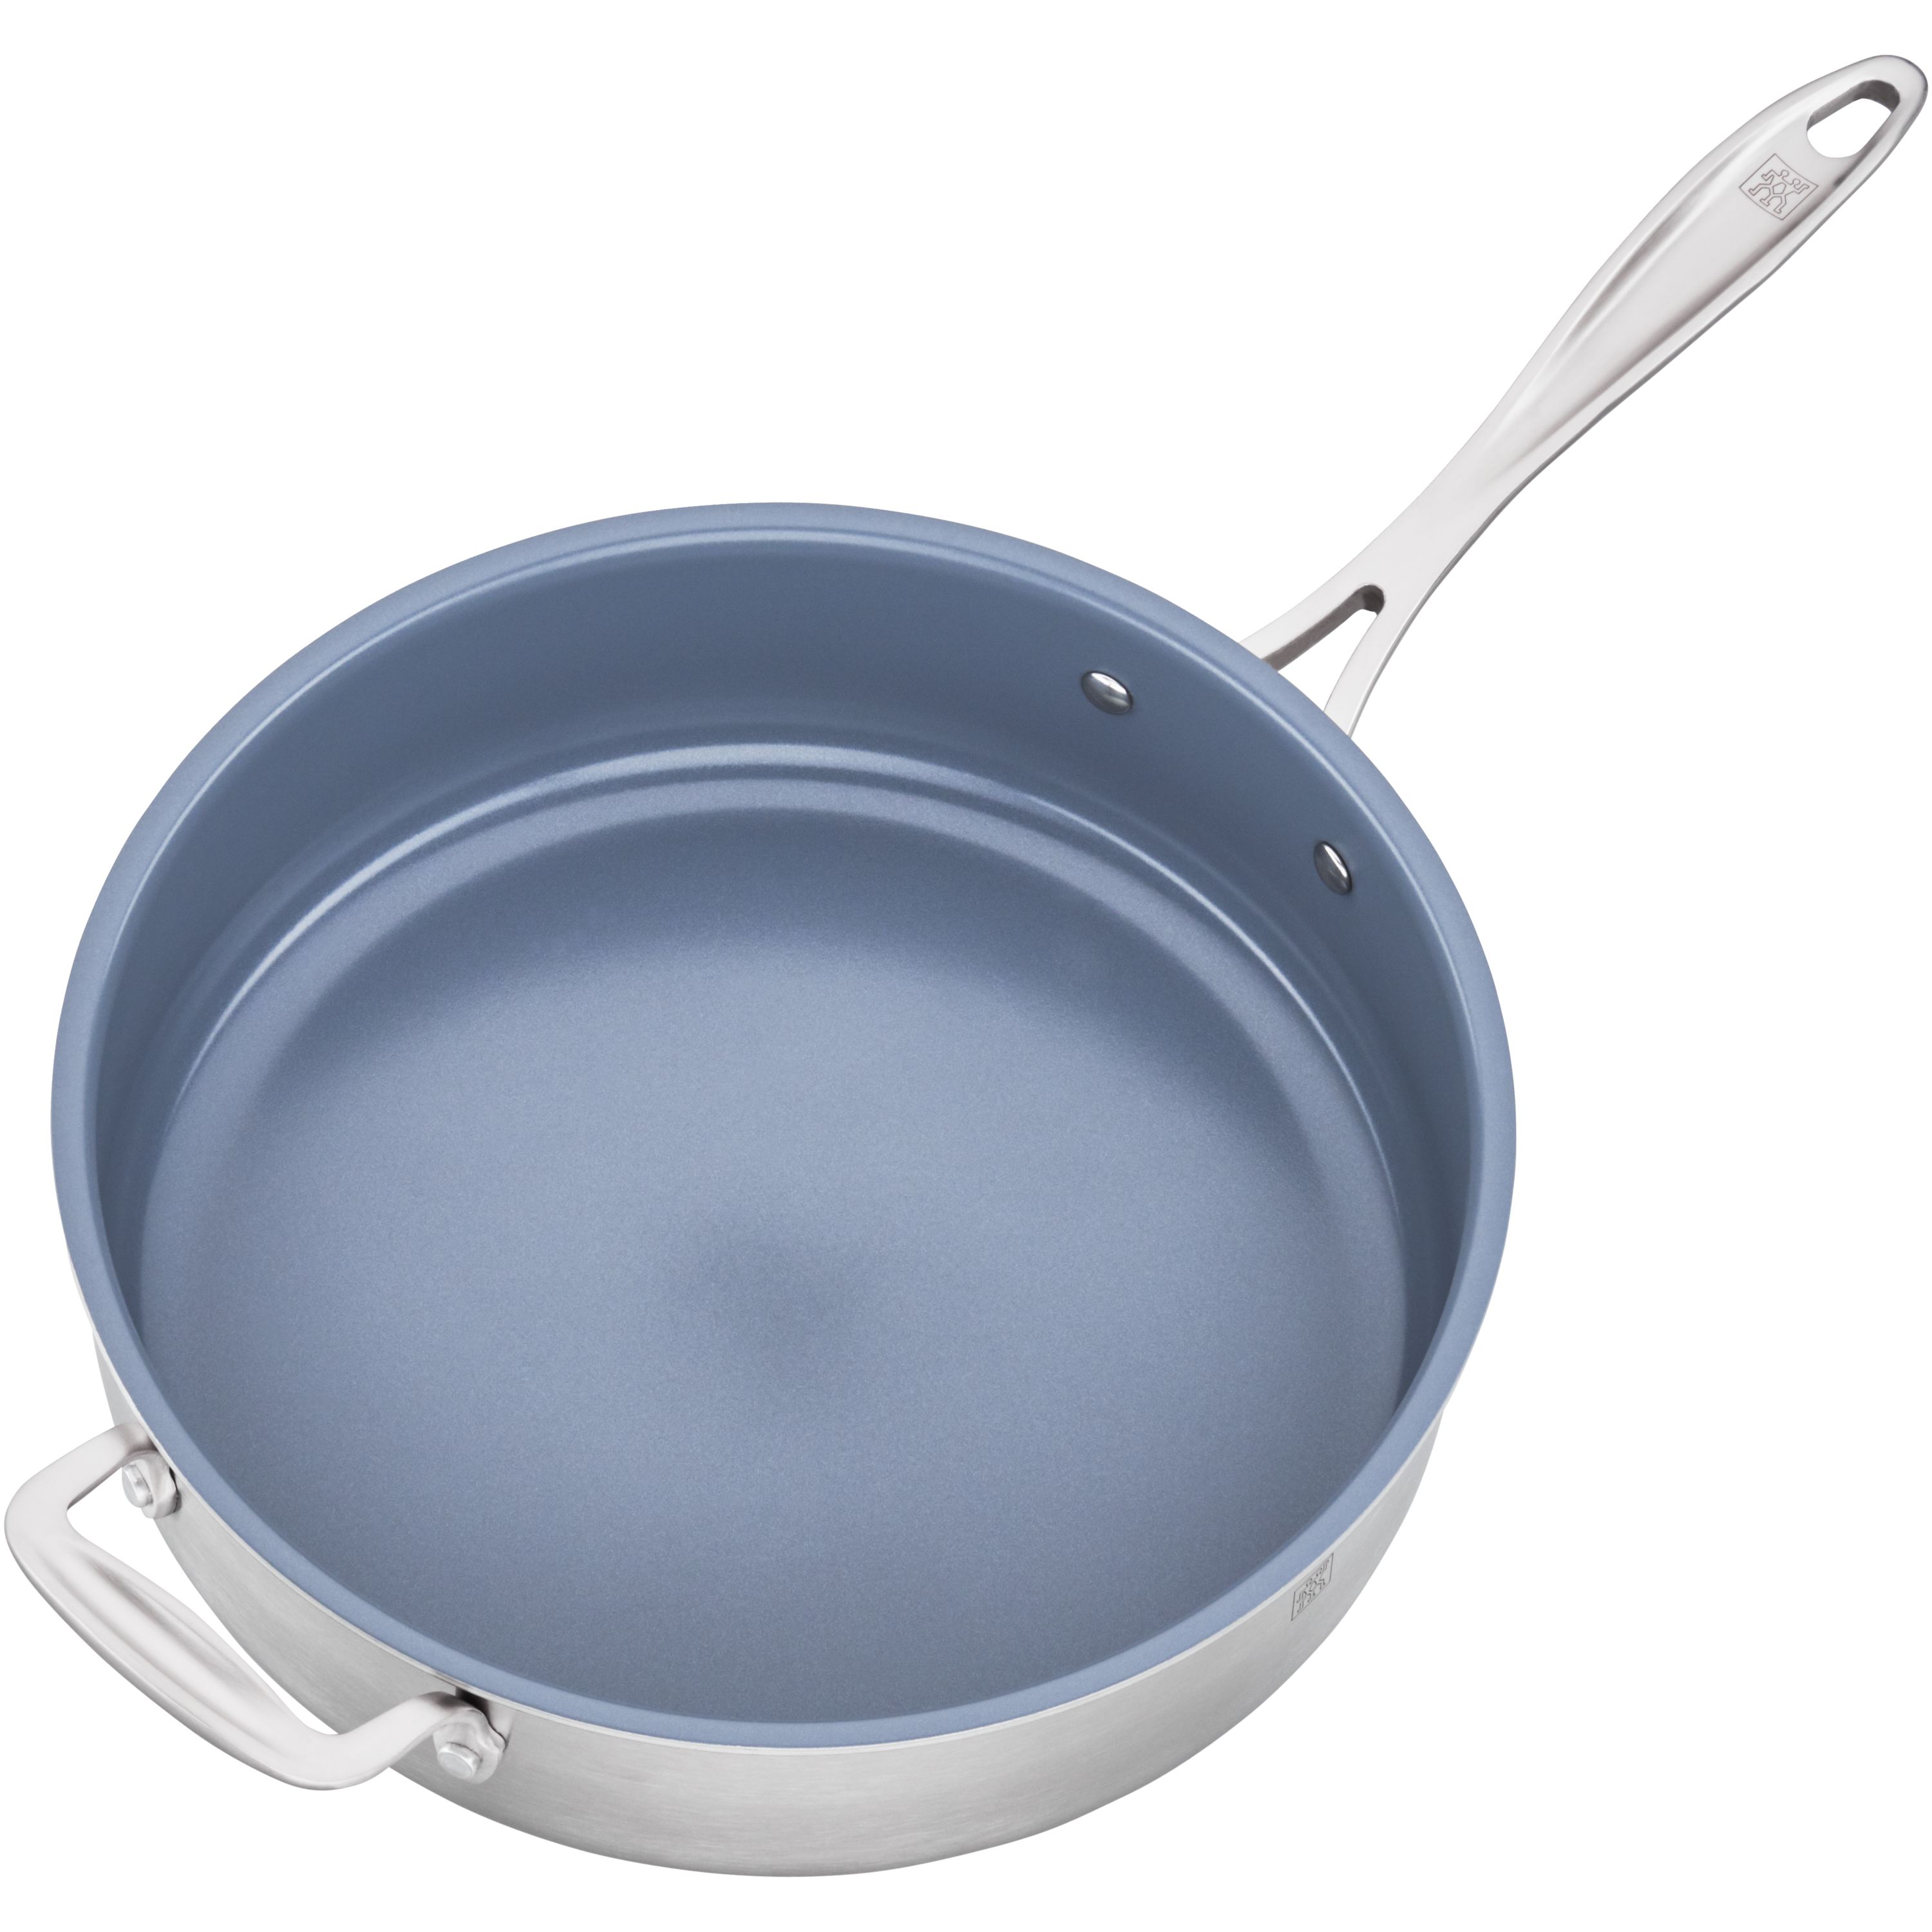 Zwilling Spirit 3-ply 8-inch Stainless Steel Ceramic Nonstick Fry